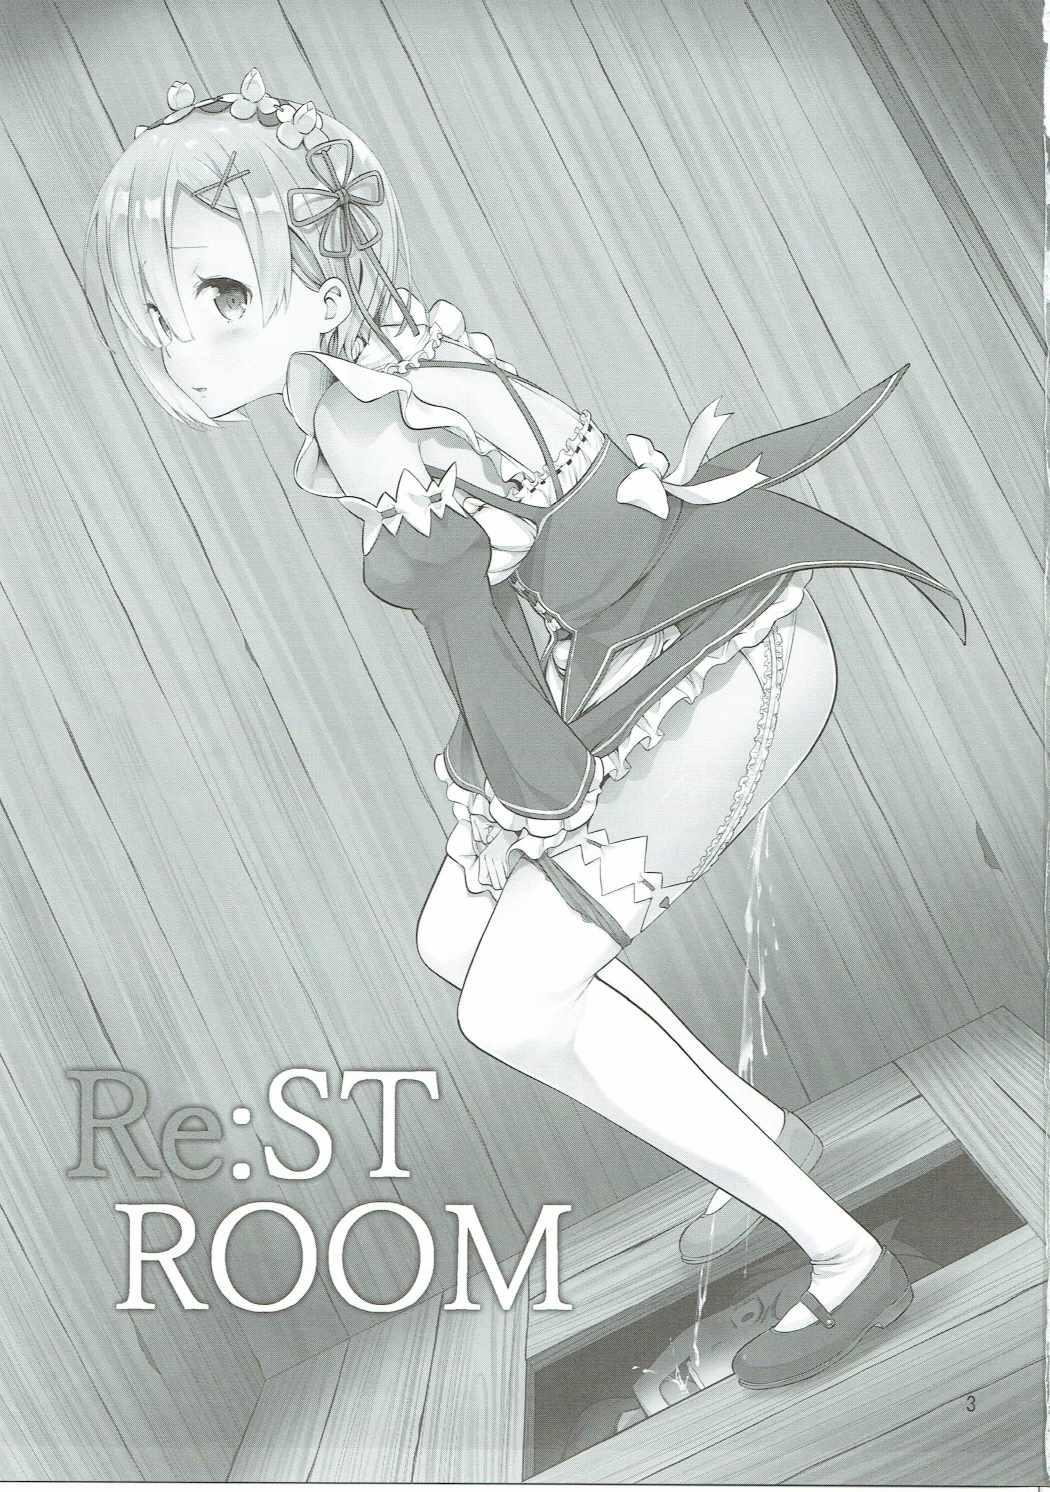 RE:ST ROOM 1